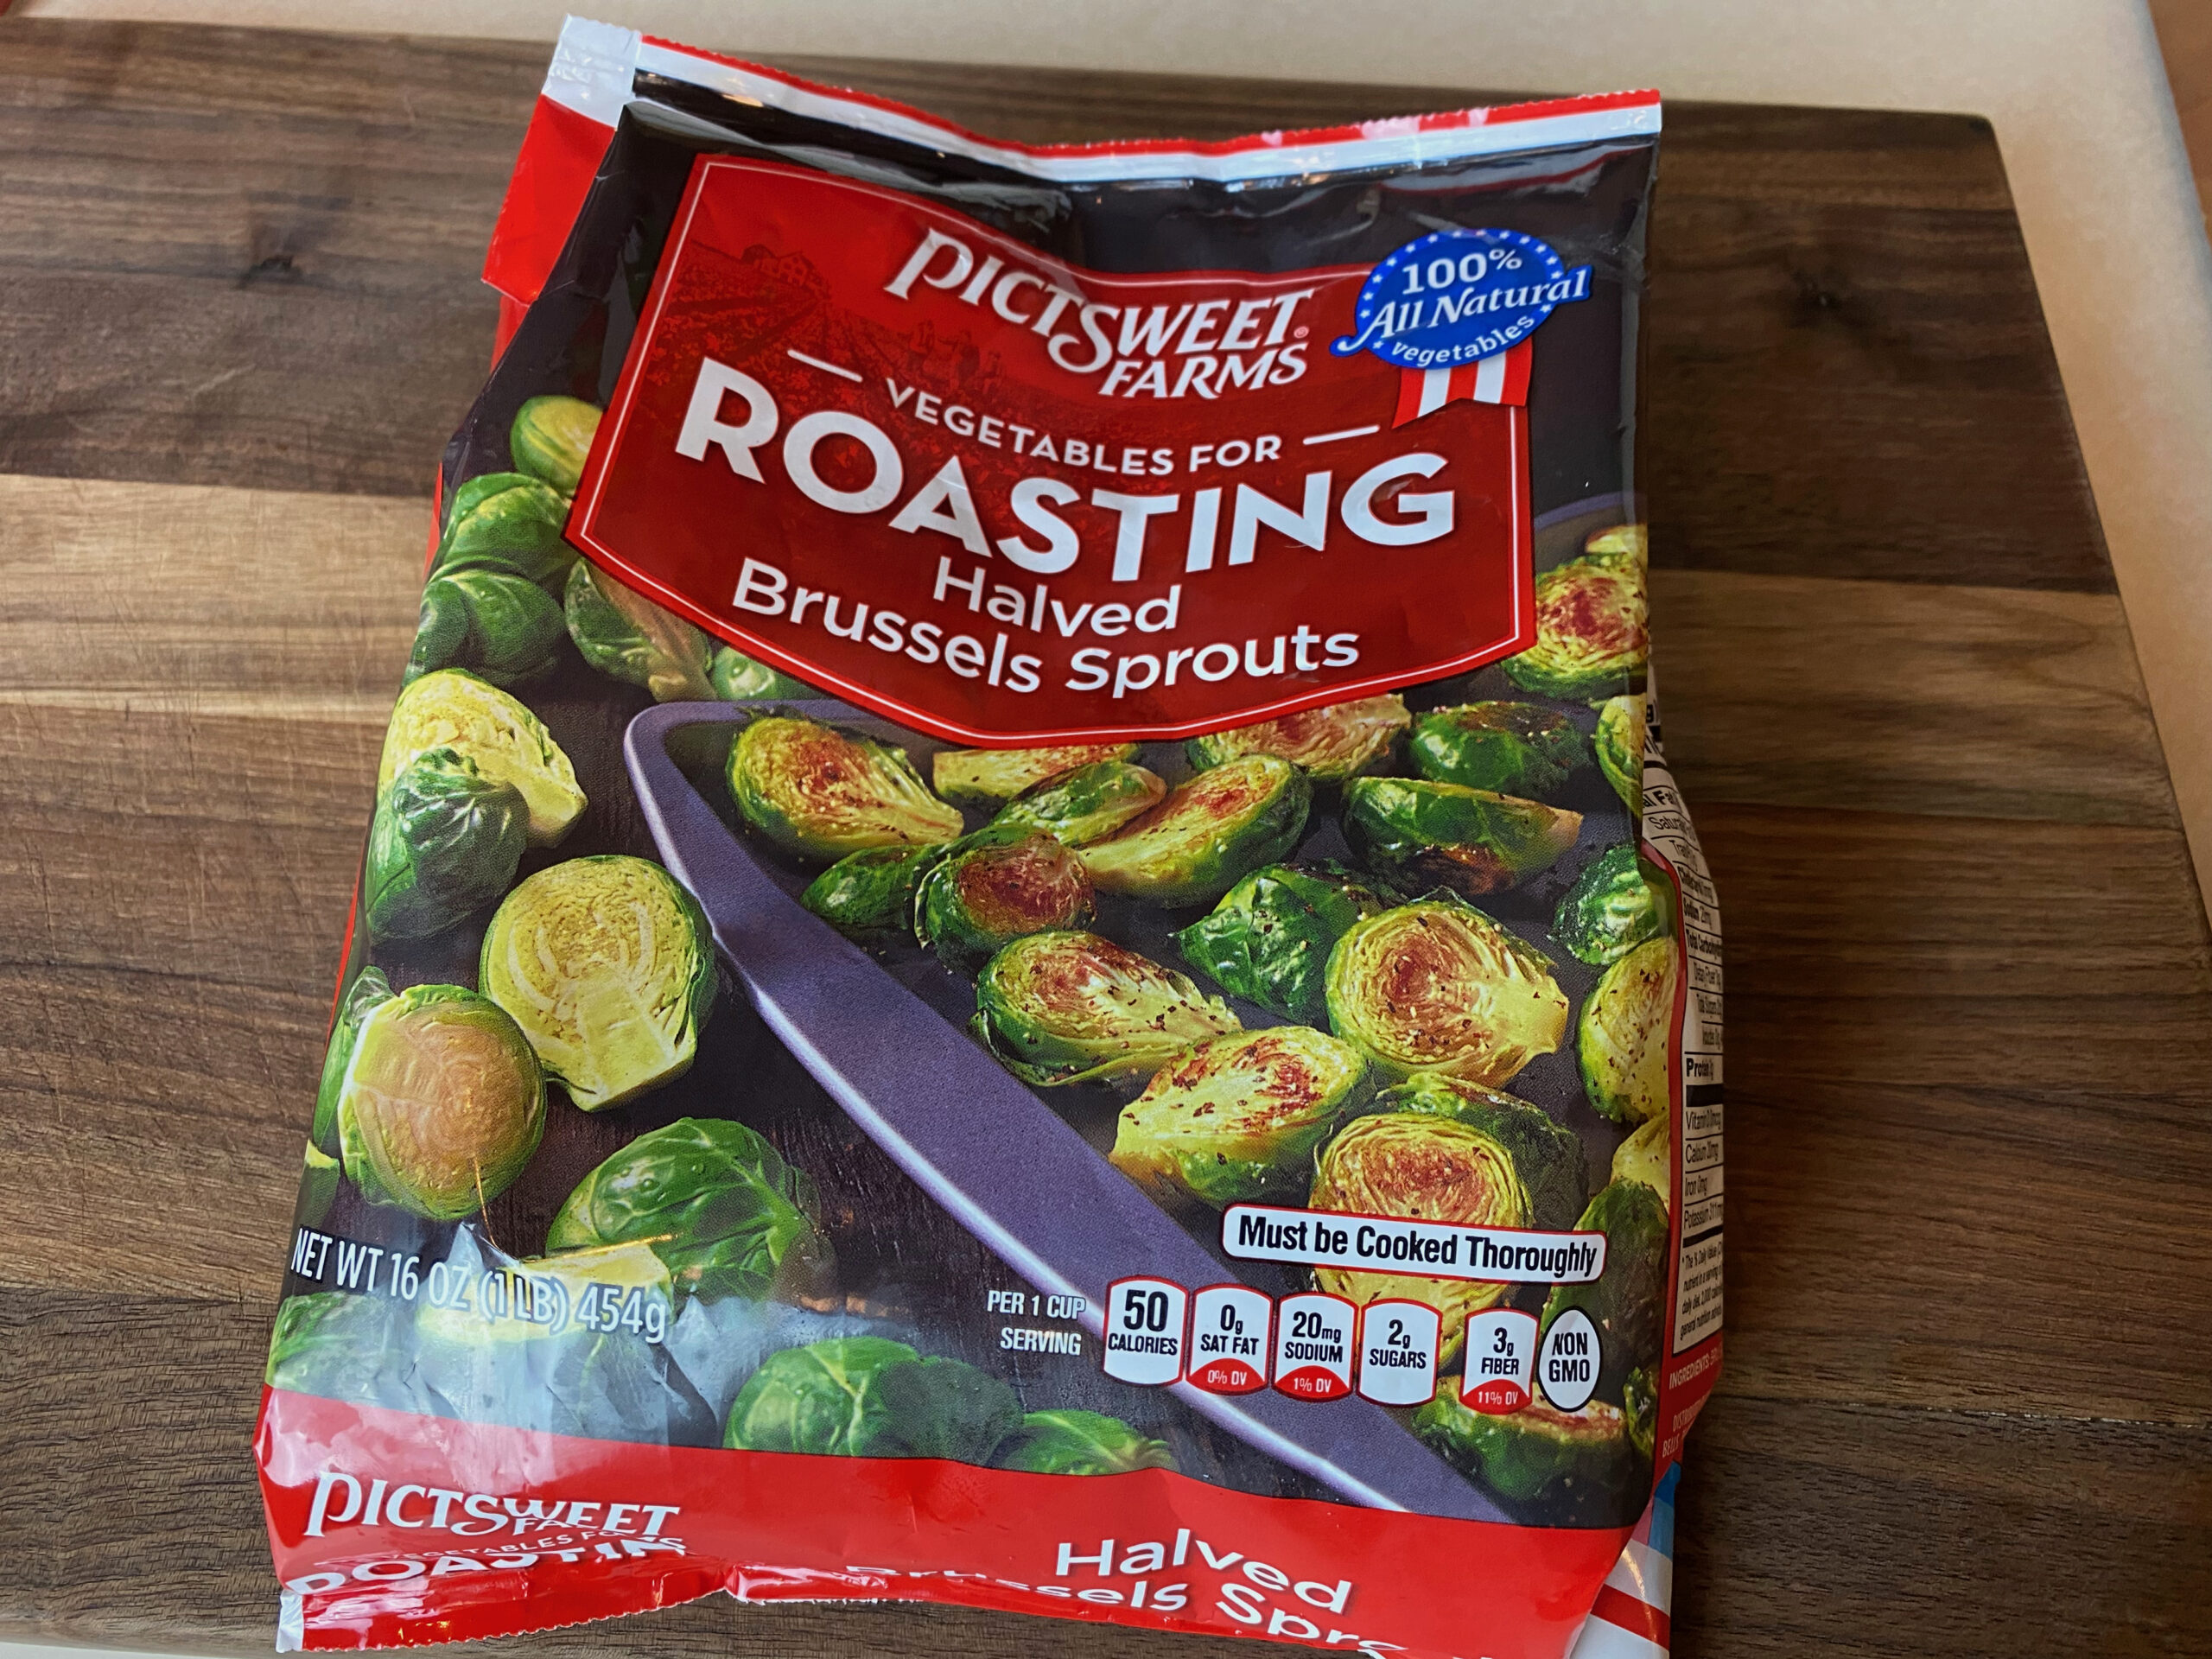 A bag of frozen brussels sprouts